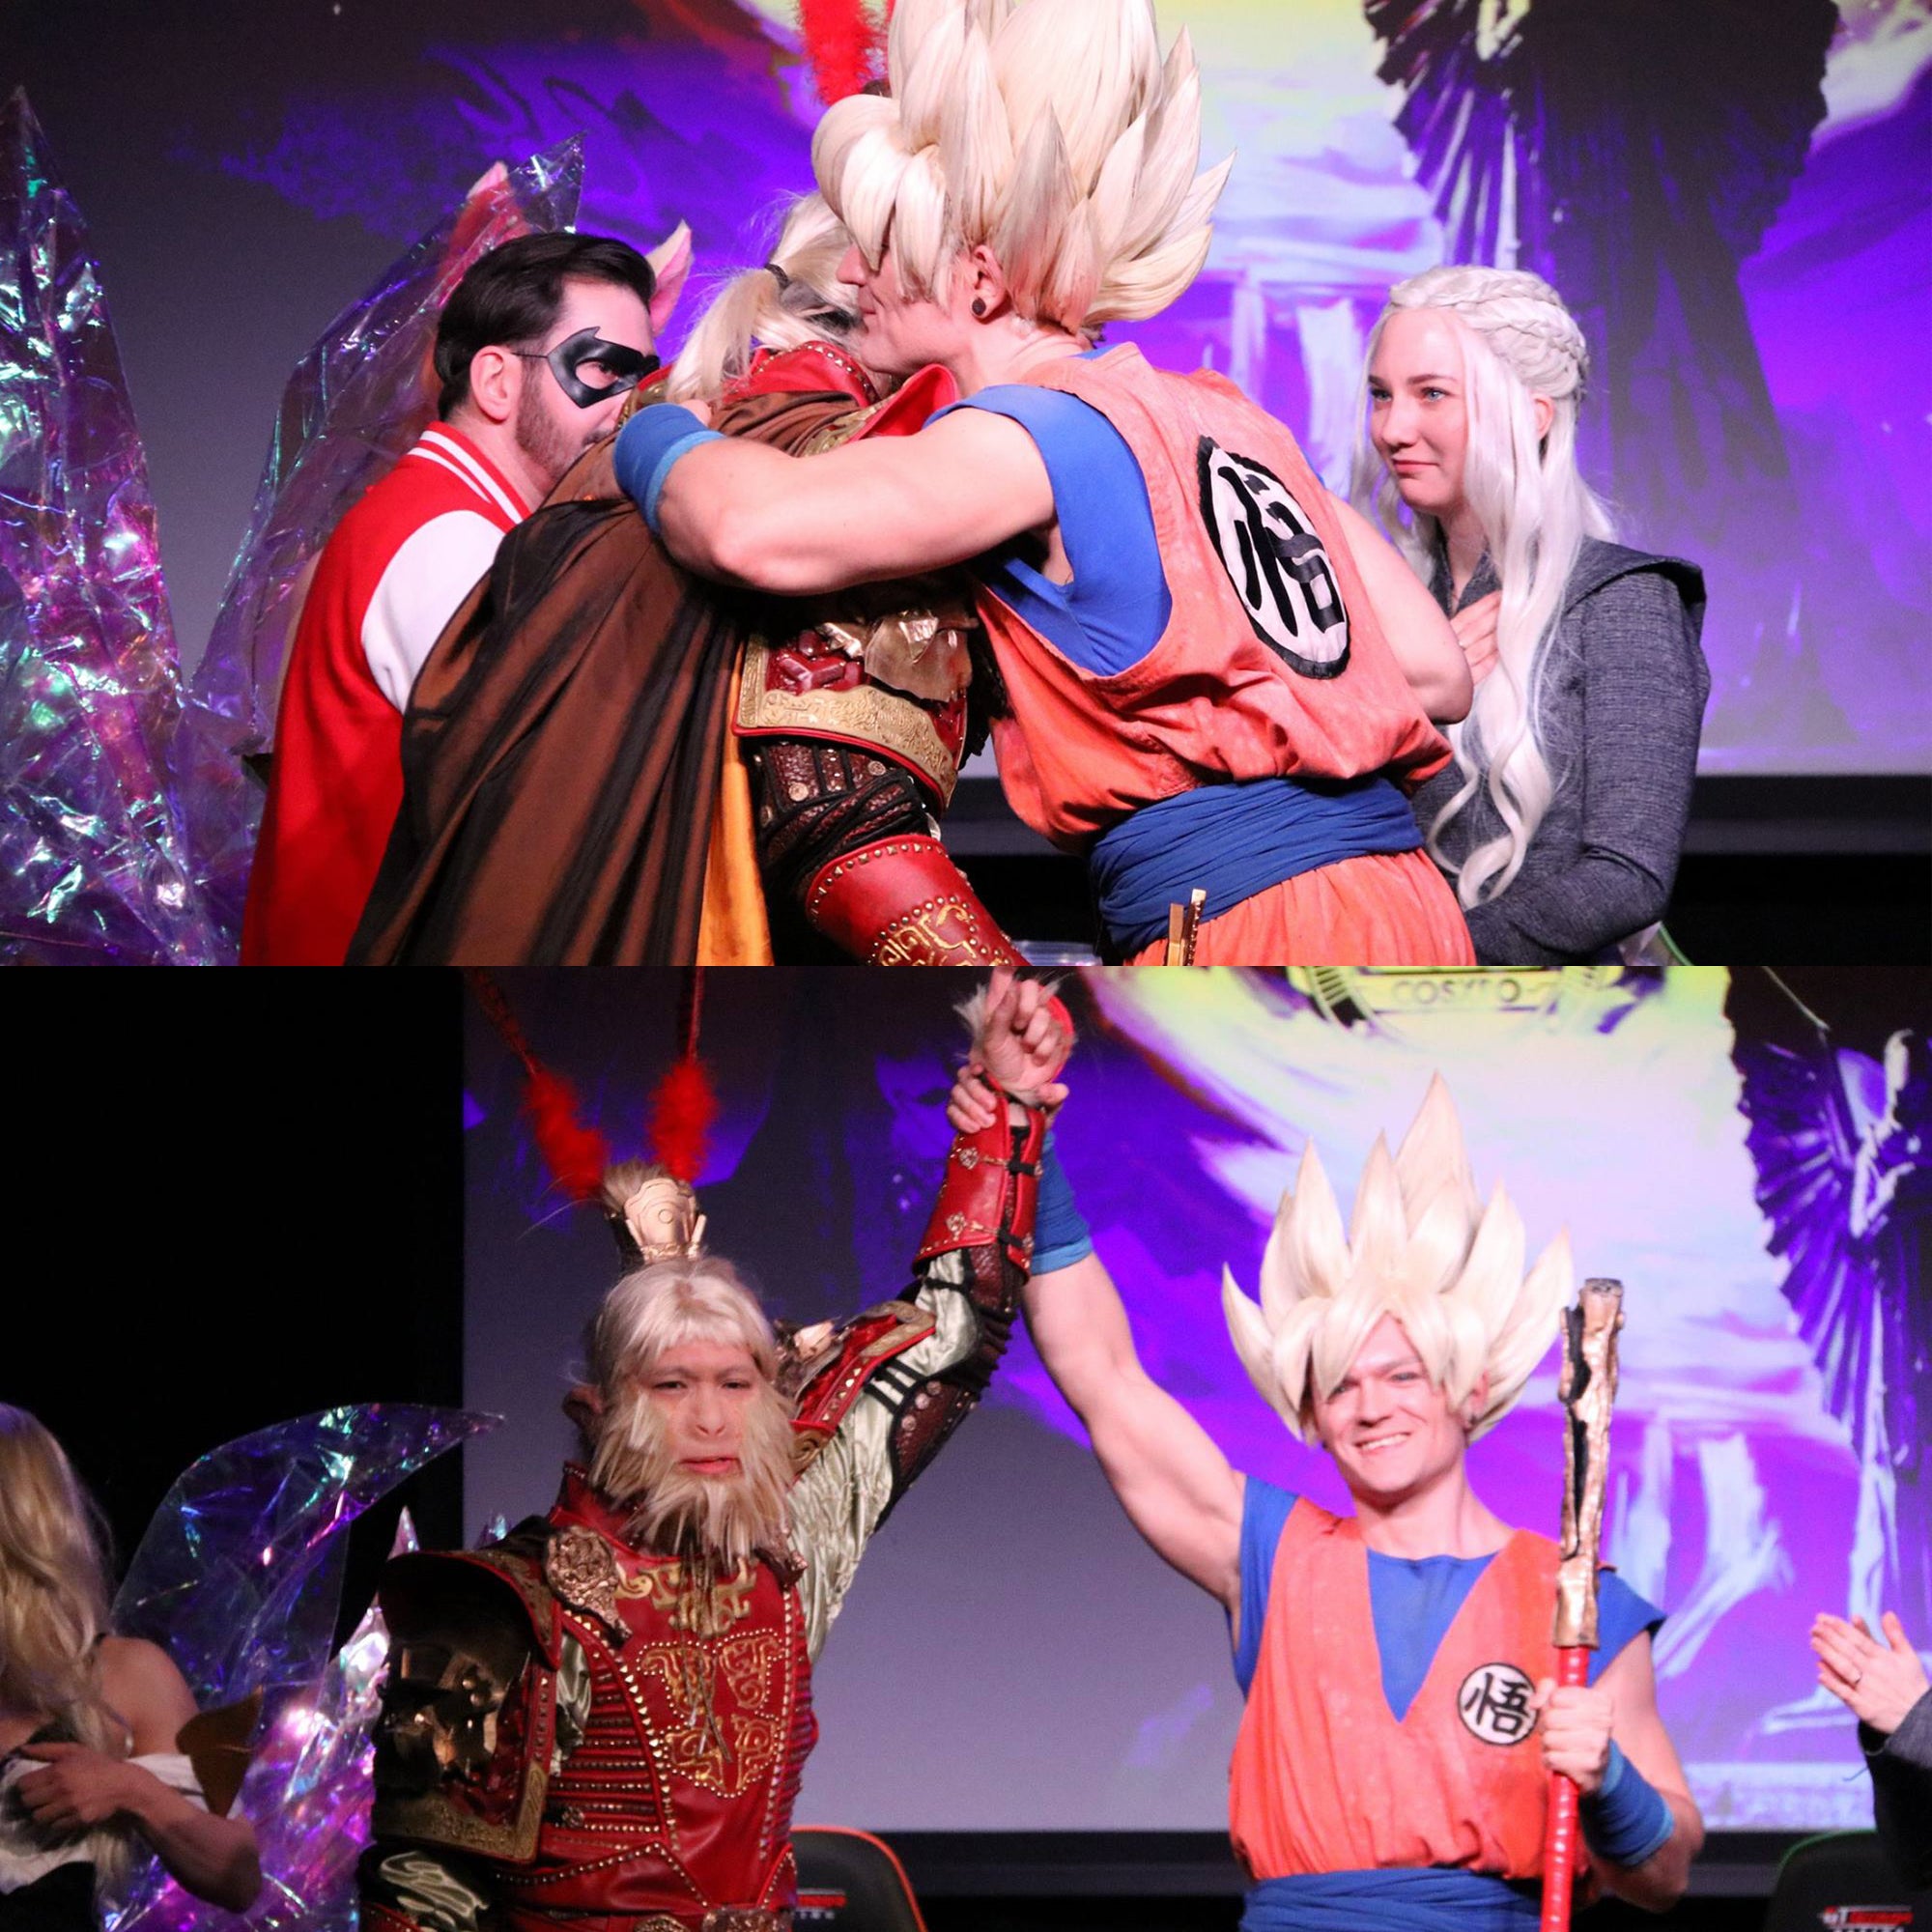 Sun Wukong hugs Son Goku - cosplays from journey to the west and Dragonball